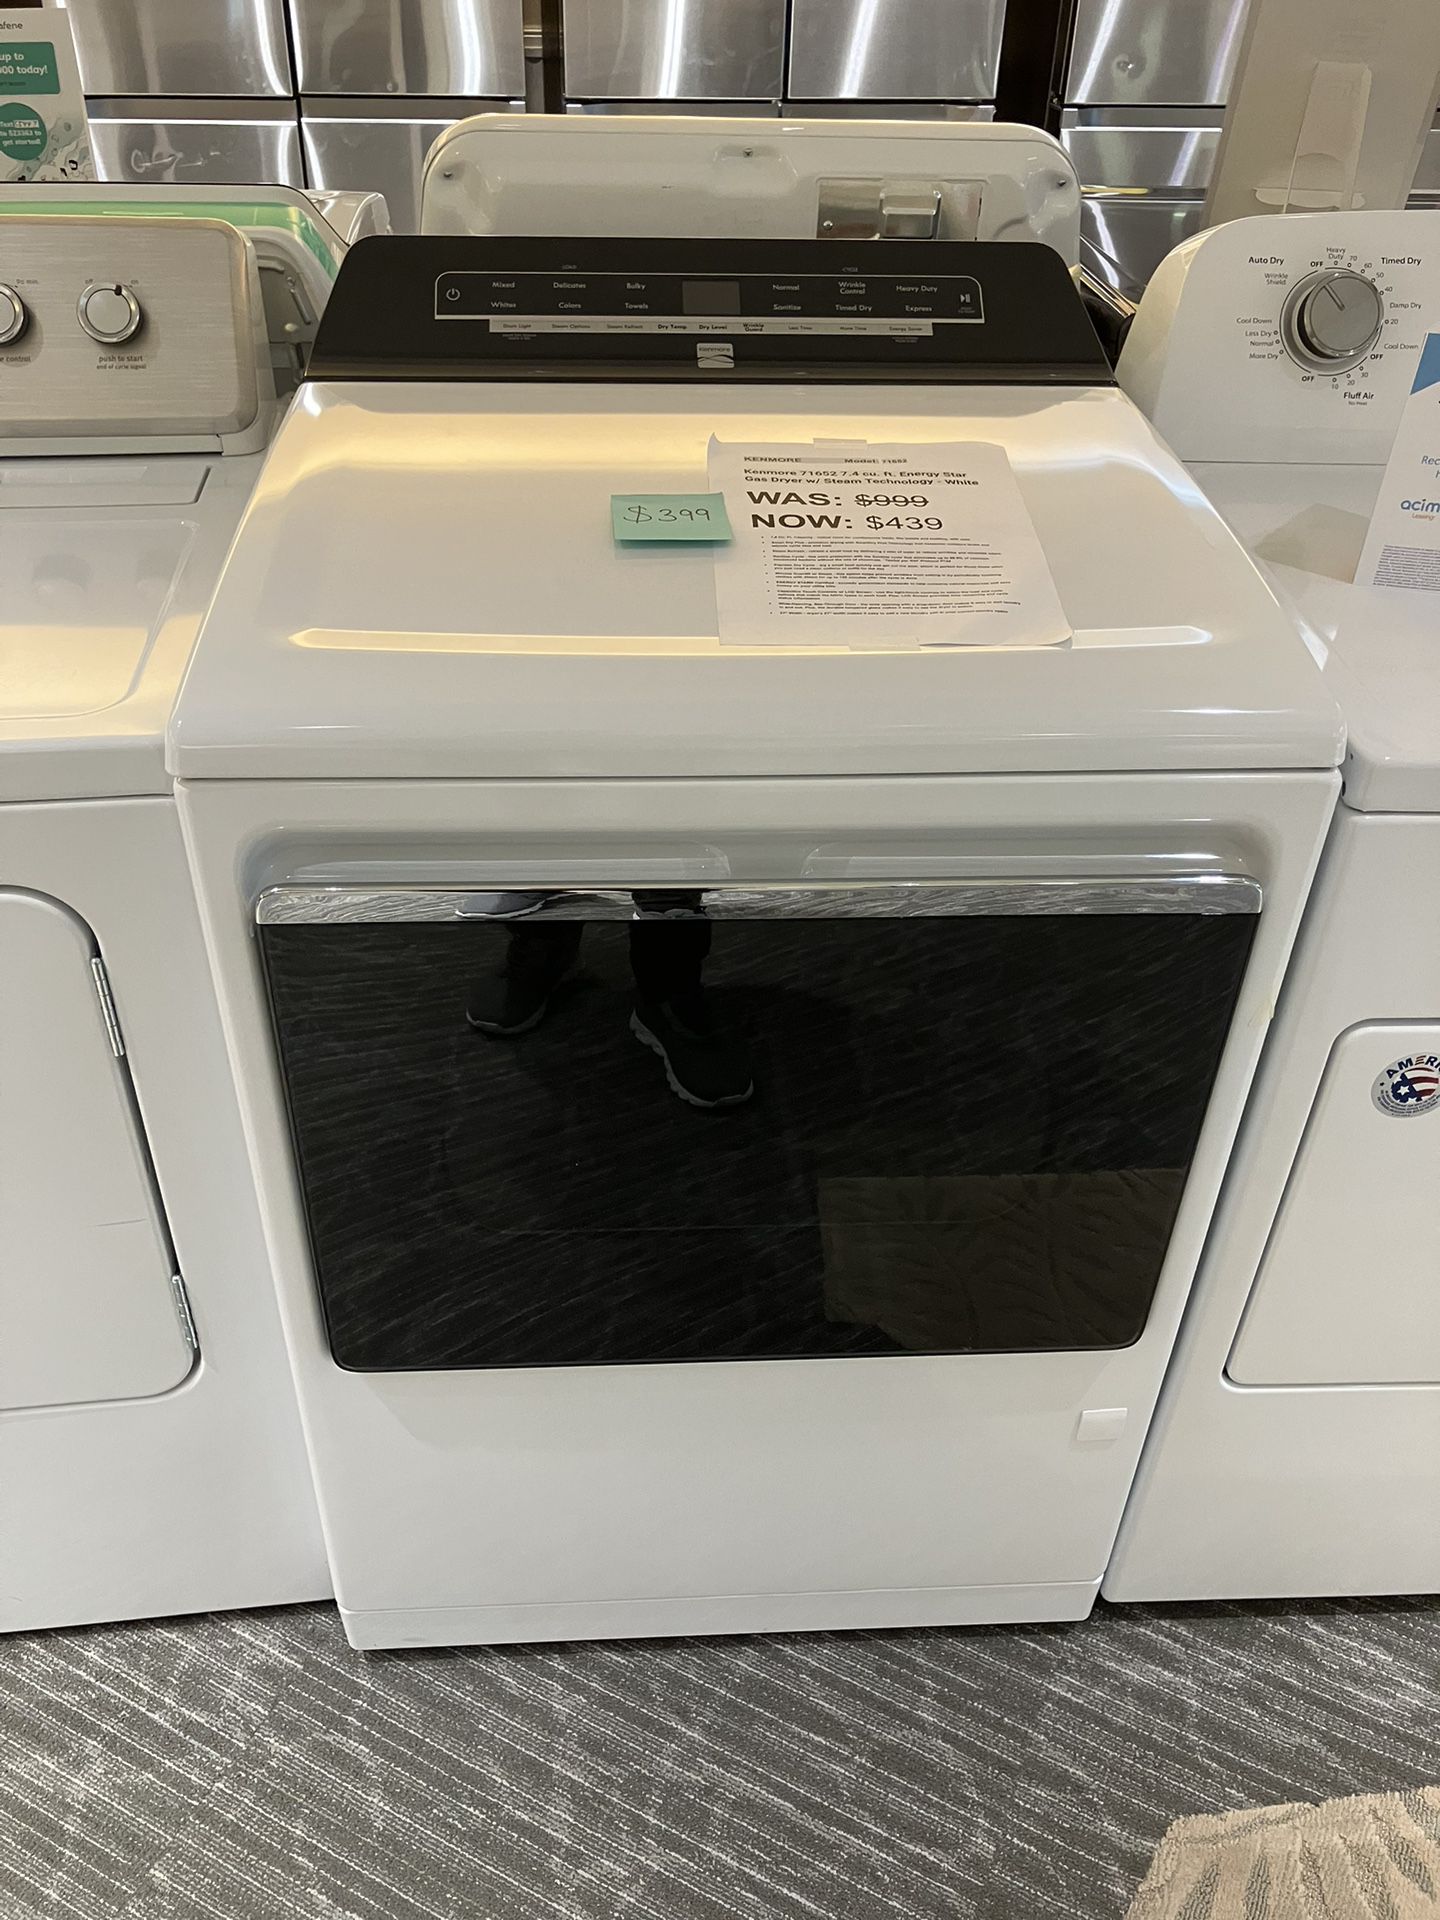 Kenmore 71652 7.4 cu. ft. Energy Star Gas Dryer w/ Steam Technology - White